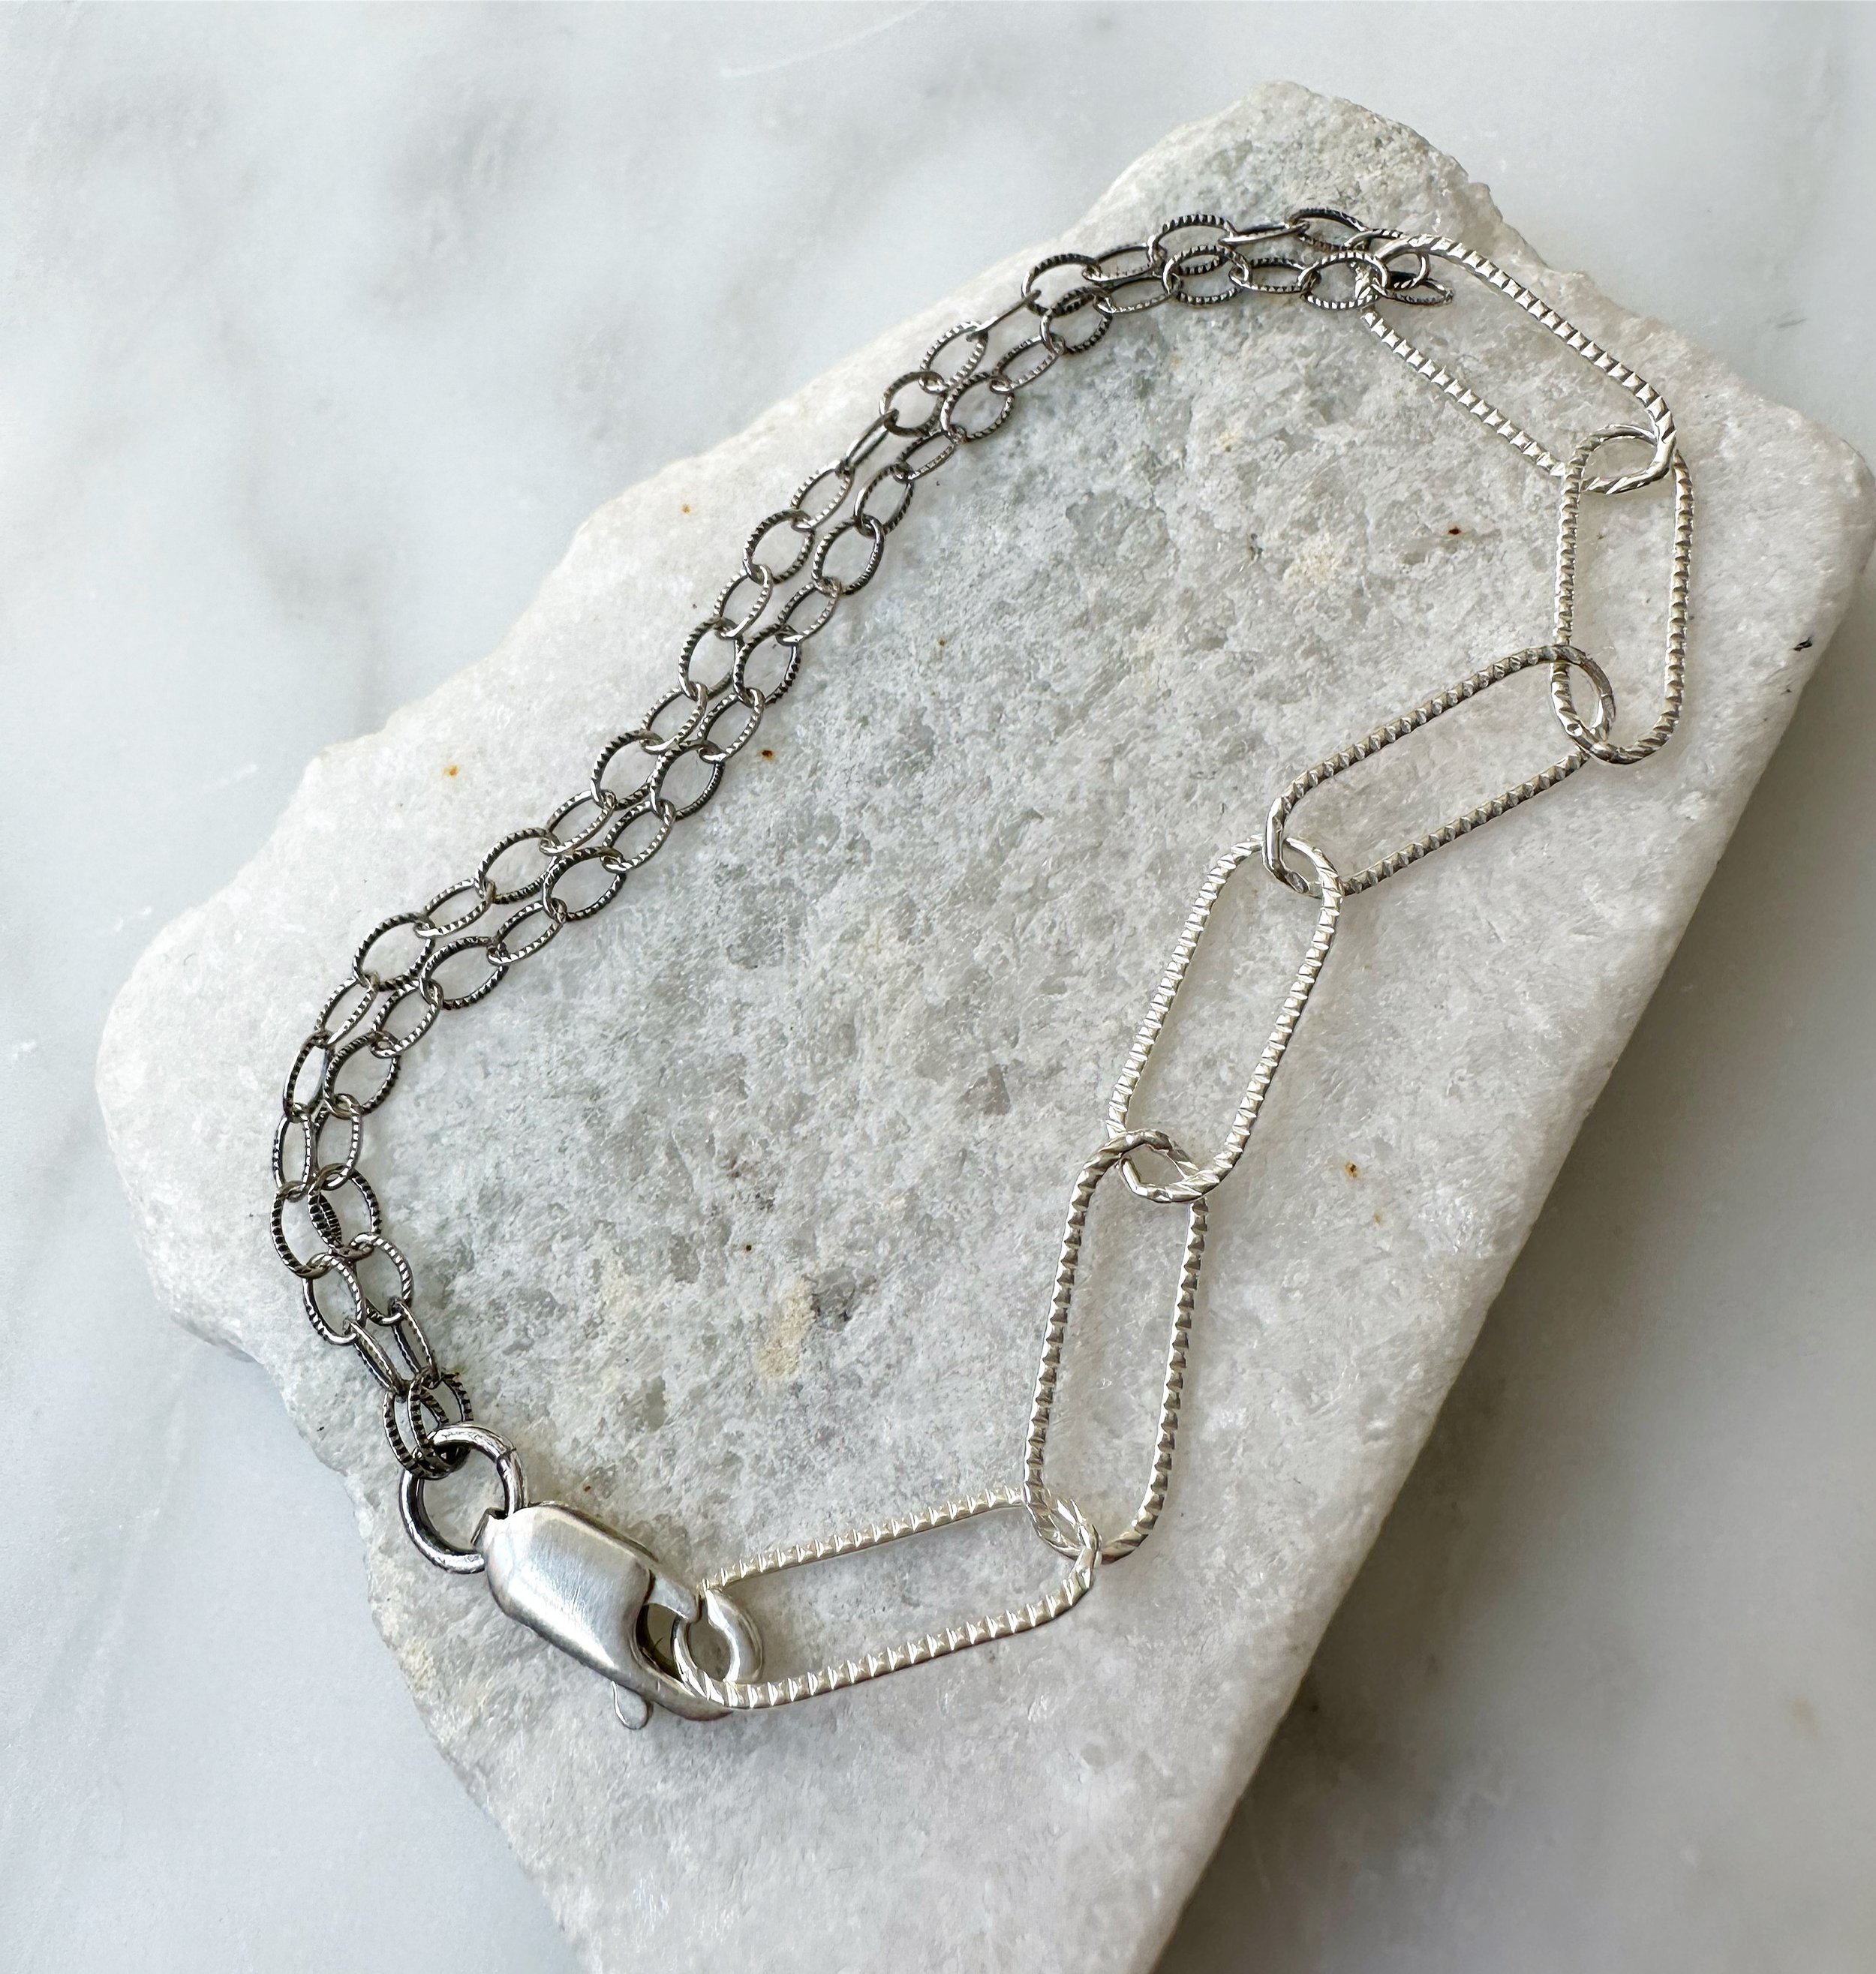 Chunky Paperclip Chain Bracelet in Gold and Silver - Mixed Metals Char –  Lotus Stone Design